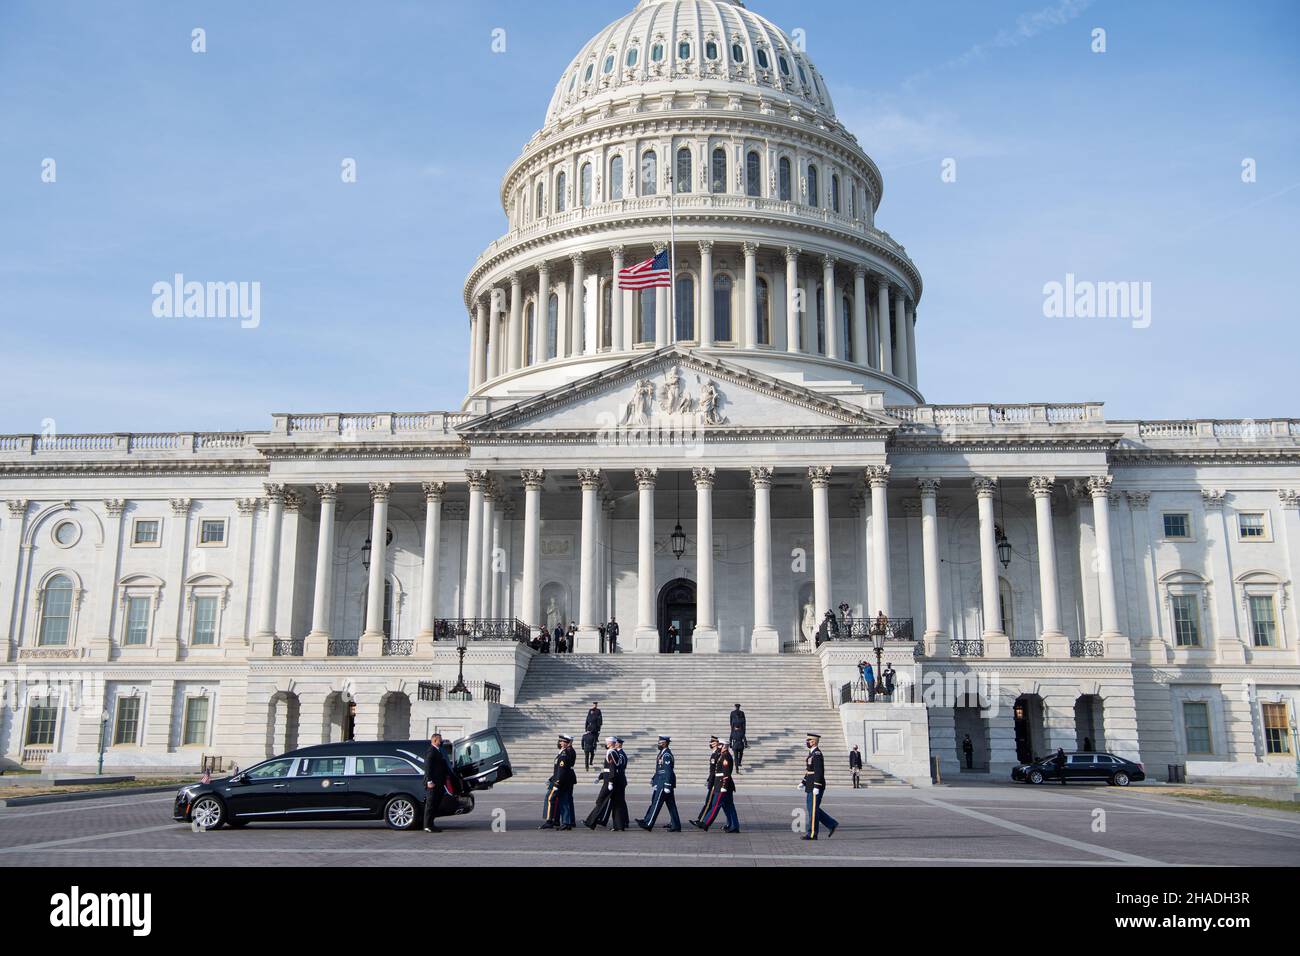 Washington, United States of America. 09 December, 2021. U.S. Armed Forces honor guard prepare to carry the flag-draped casket of World War II veteran and former Senator Robert Dole up the steps of the U.S. Capitol where it will lay in state,  December 9, 2021 in Washington, D.C. Senator Dole died at age 98 following a lifetime of service to the nation.  Credit: Sgt. Kevin Roy/U.S. Army/Alamy Live News Stock Photo